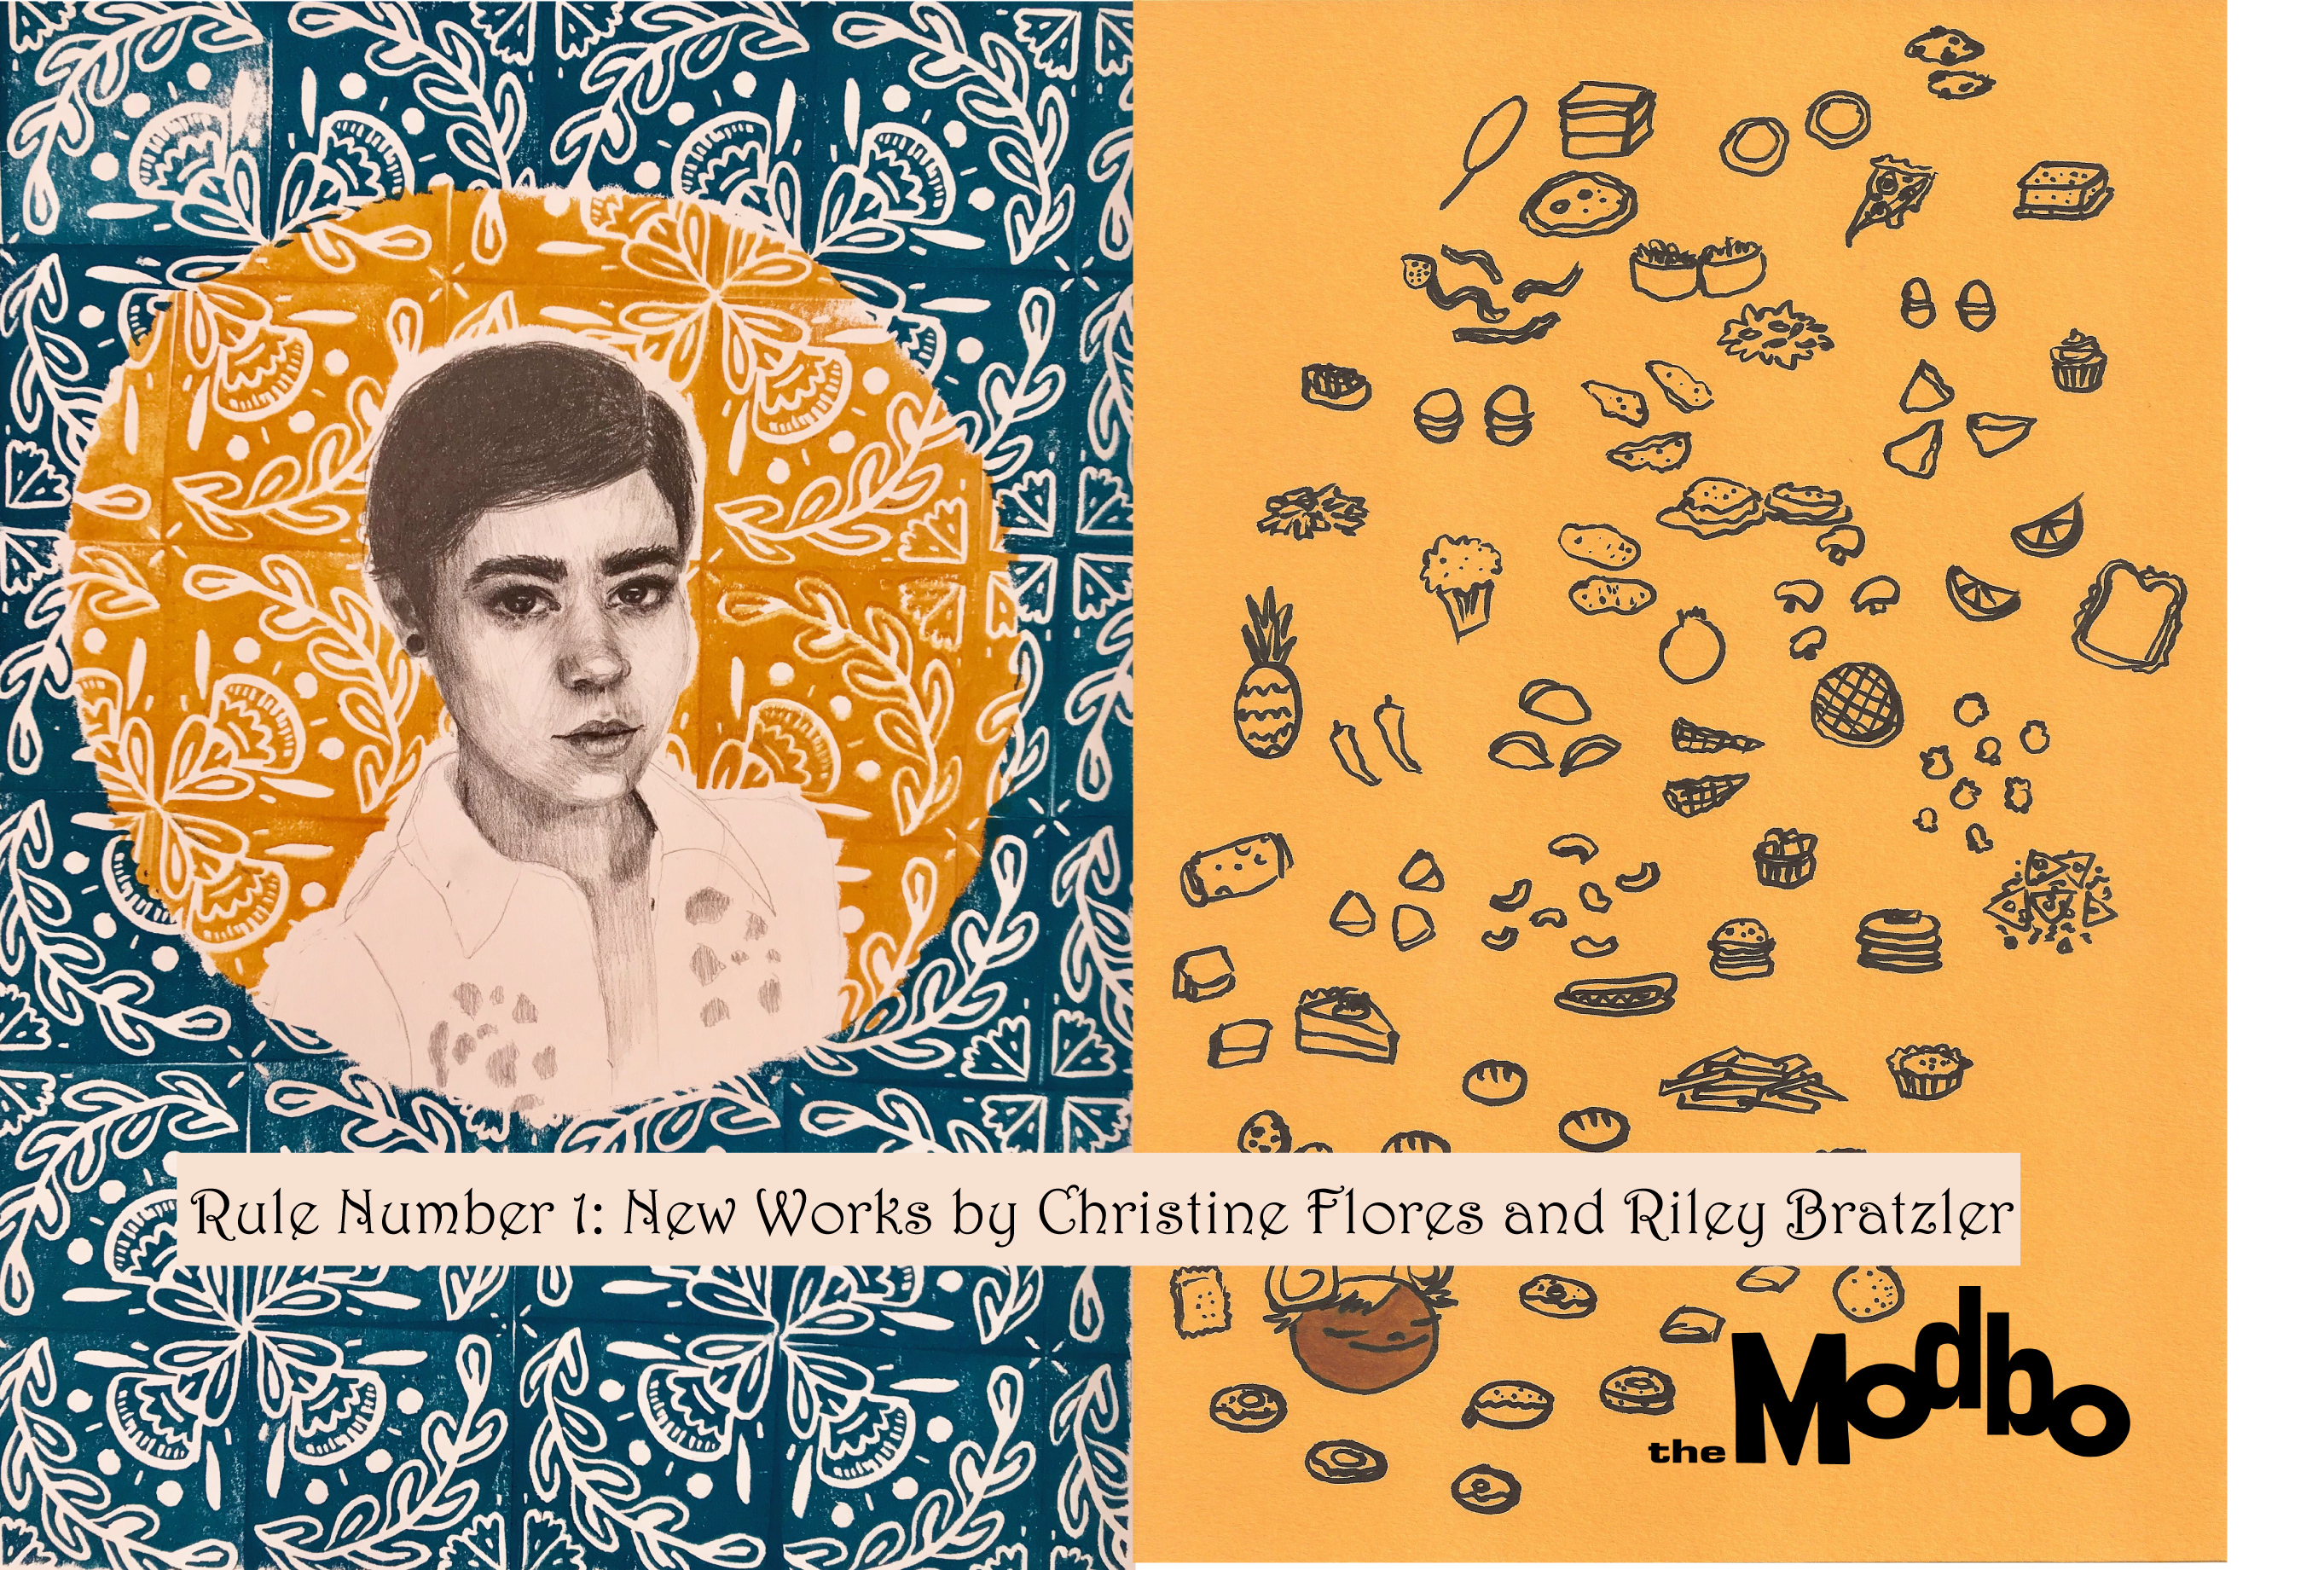 March’s First Friday at The Modbo: Rule Number 1: New Works by Christine Flores and Riley Bratzler